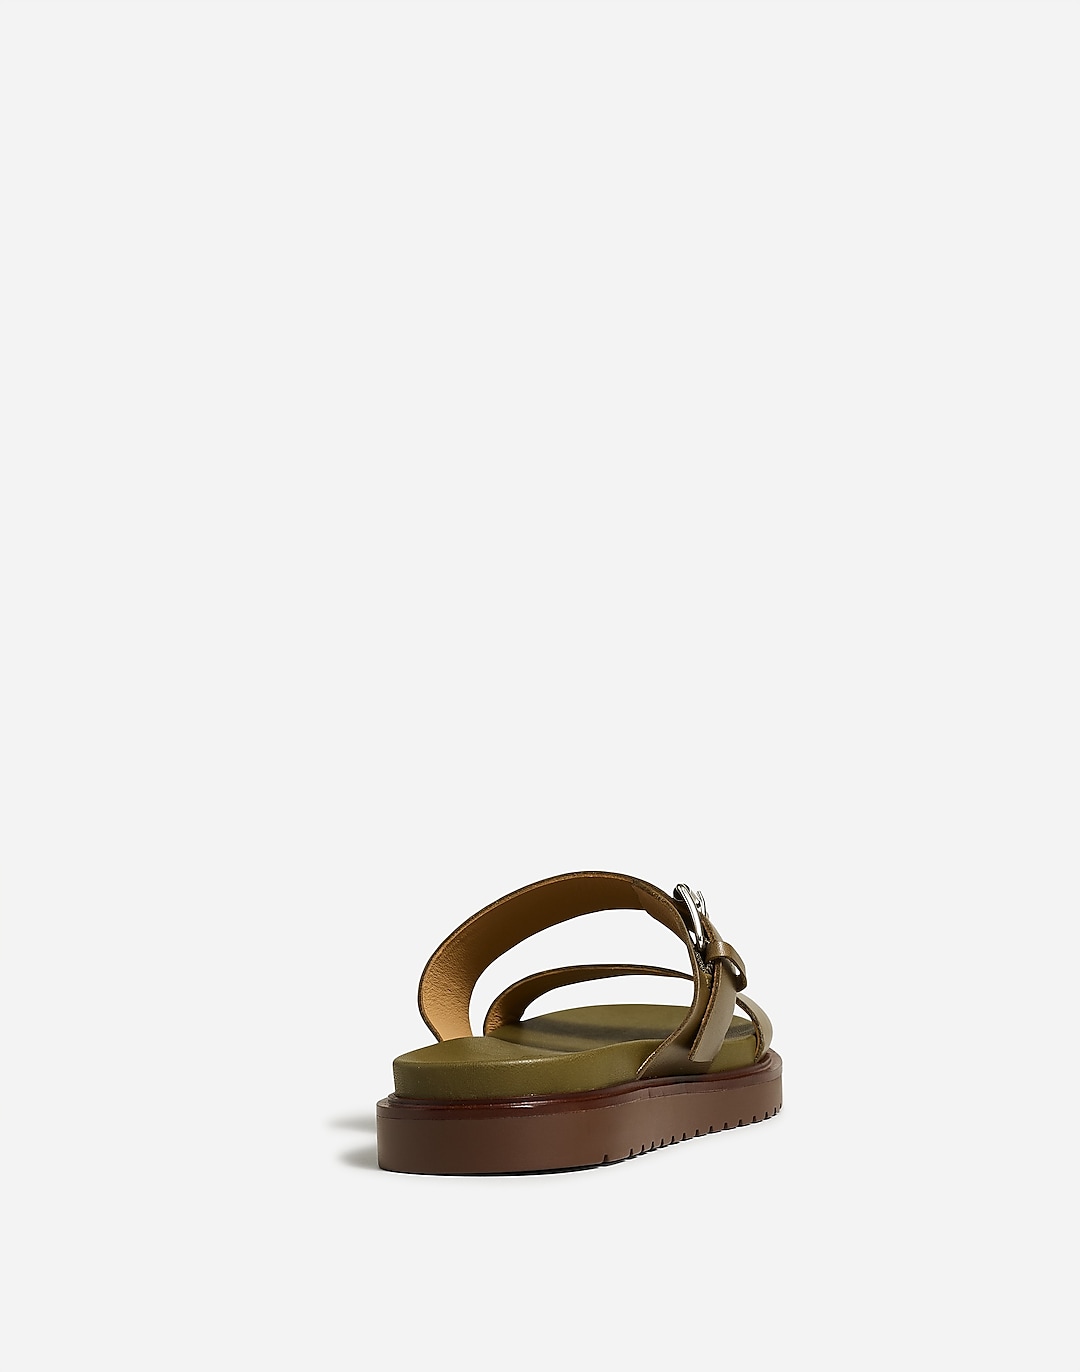 The Dee Double-Strap Slide Sandal in Leather | Madewell